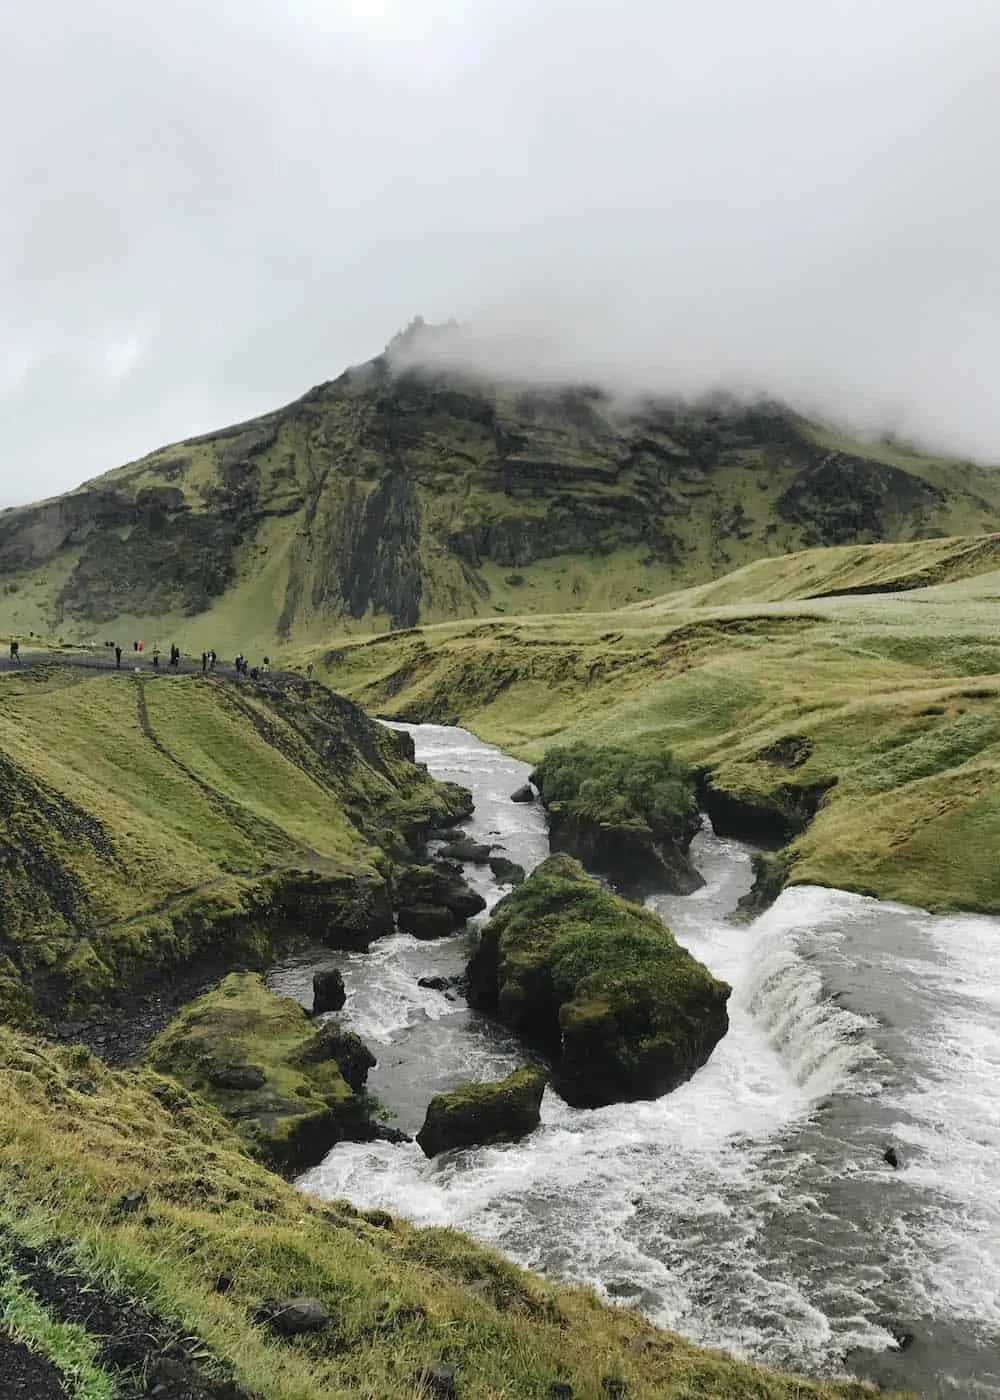 Hiking along the Skogafoss Waterfall Trail | Diary of a Toronto Girl, a Canadian lifestyle blog